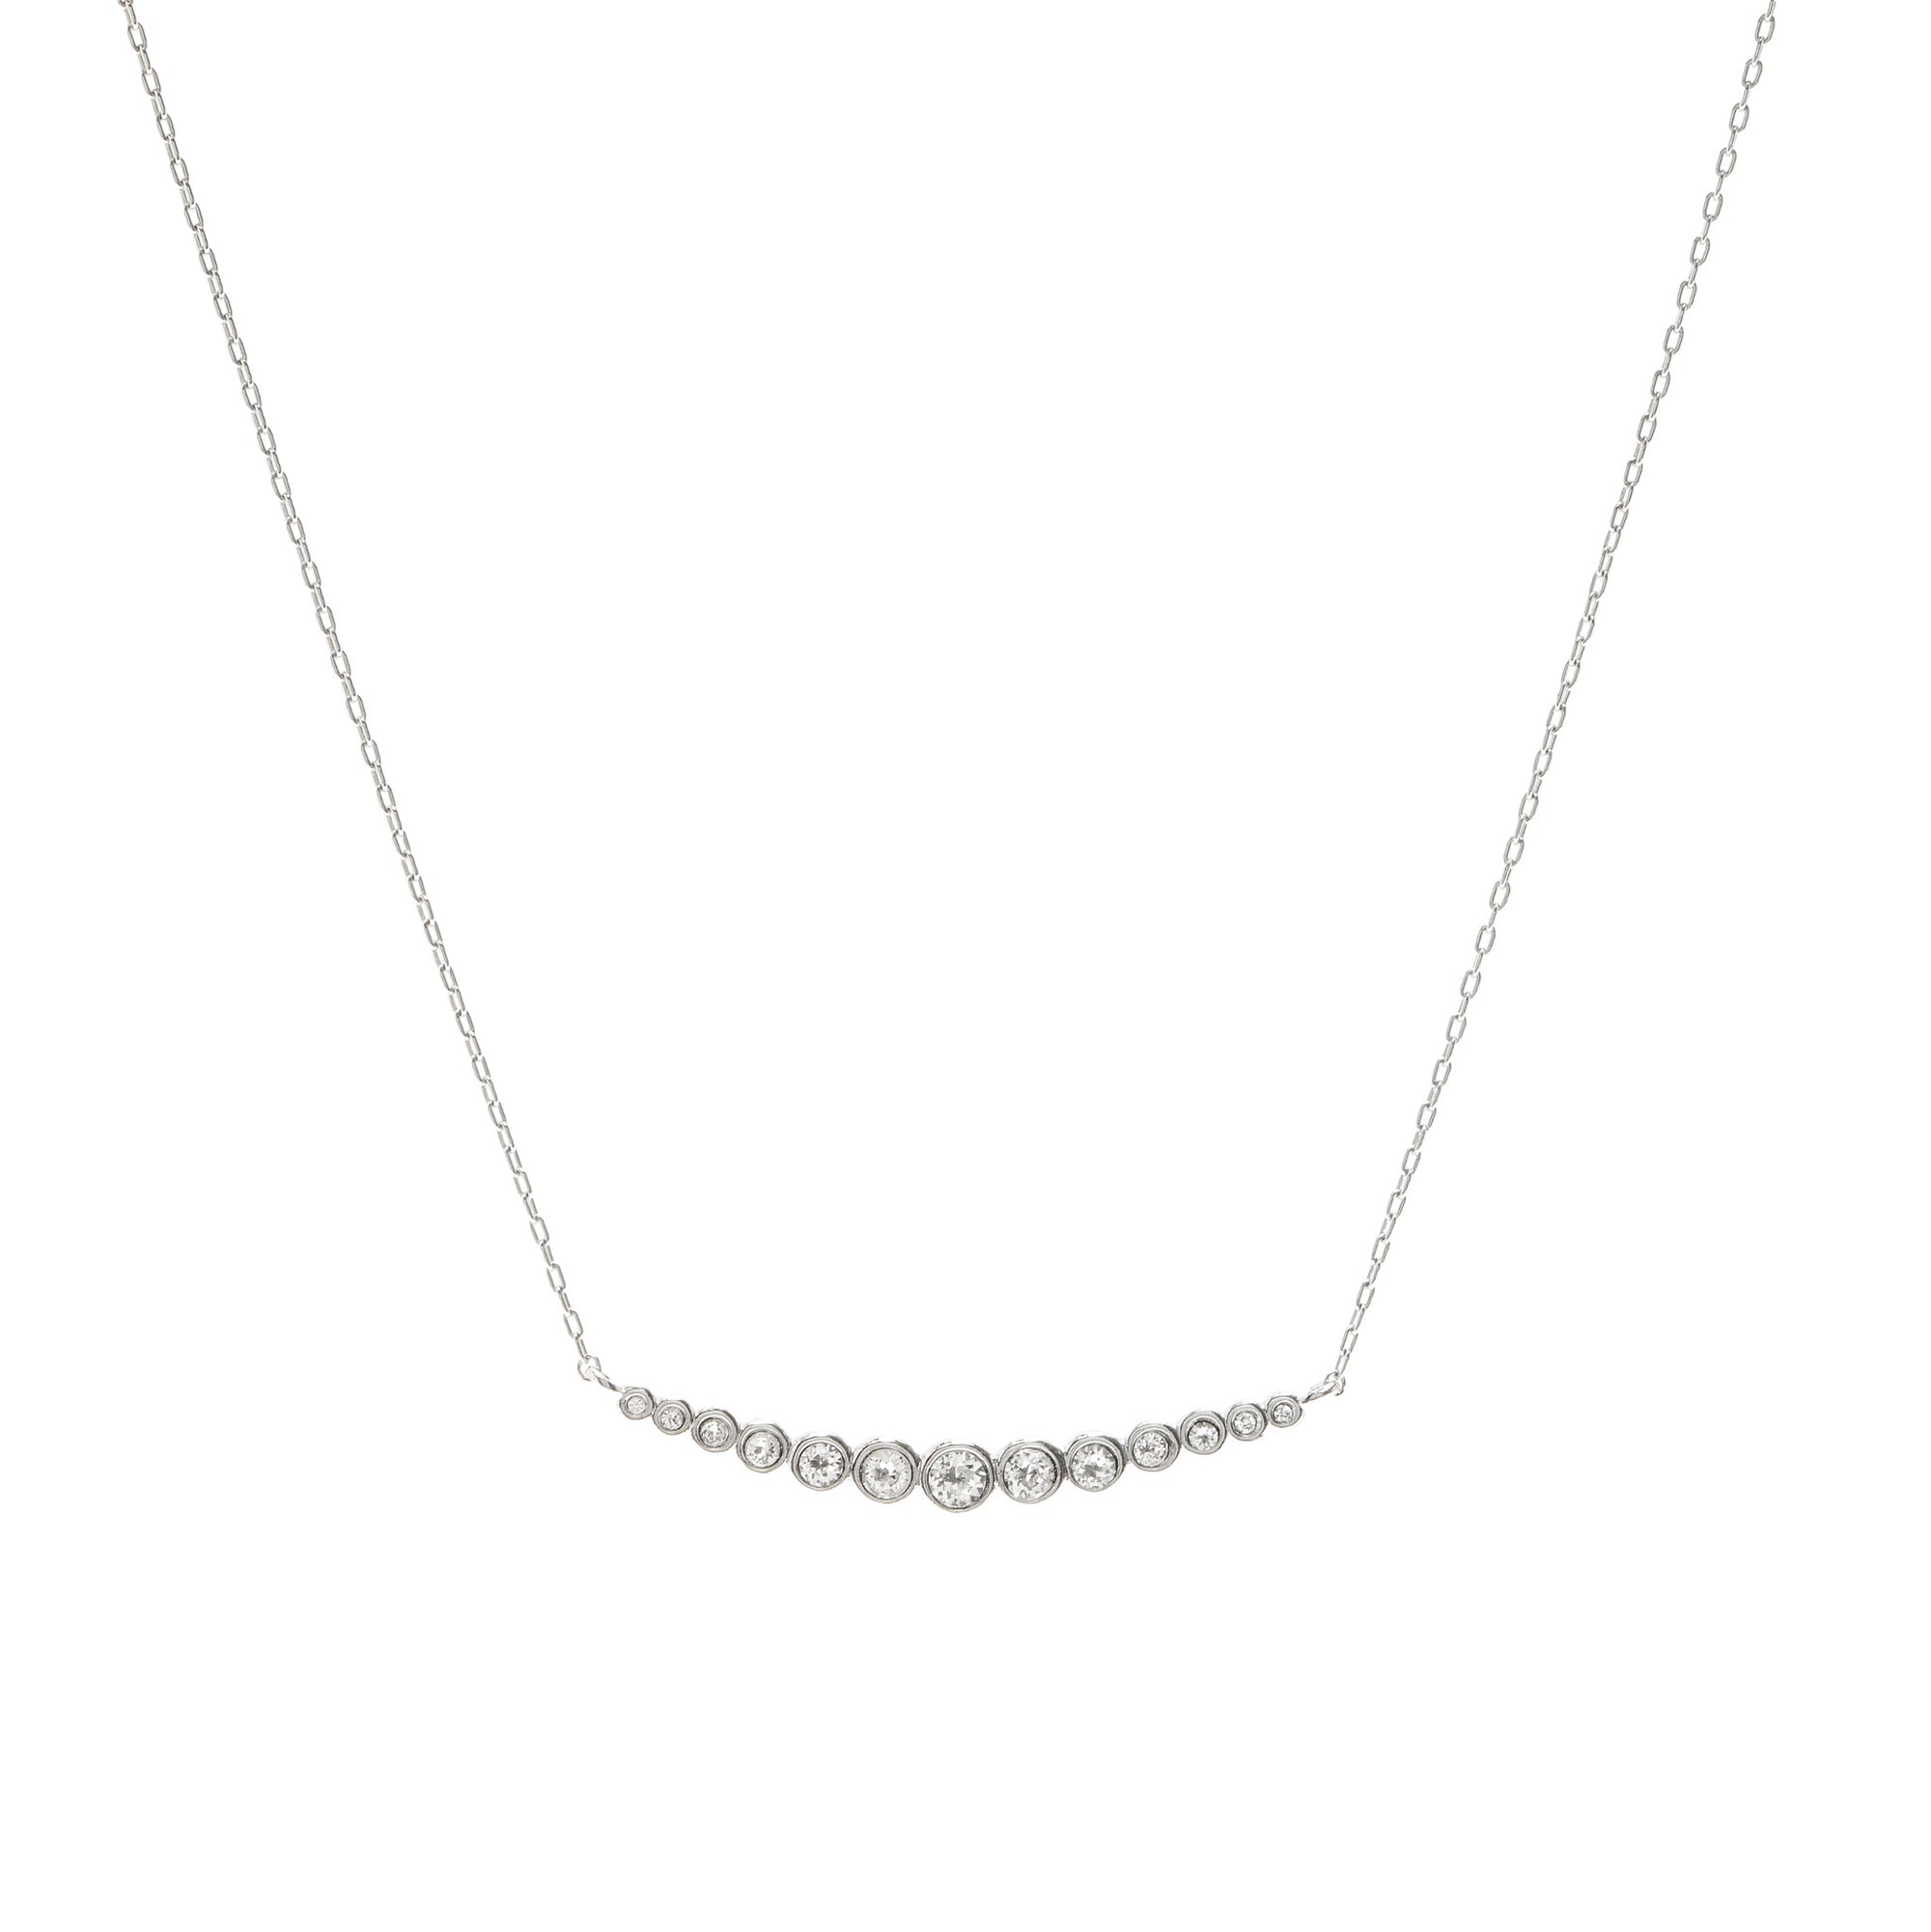 Necklaces - Milly Necklace in Rhodium - Melissa Lovy